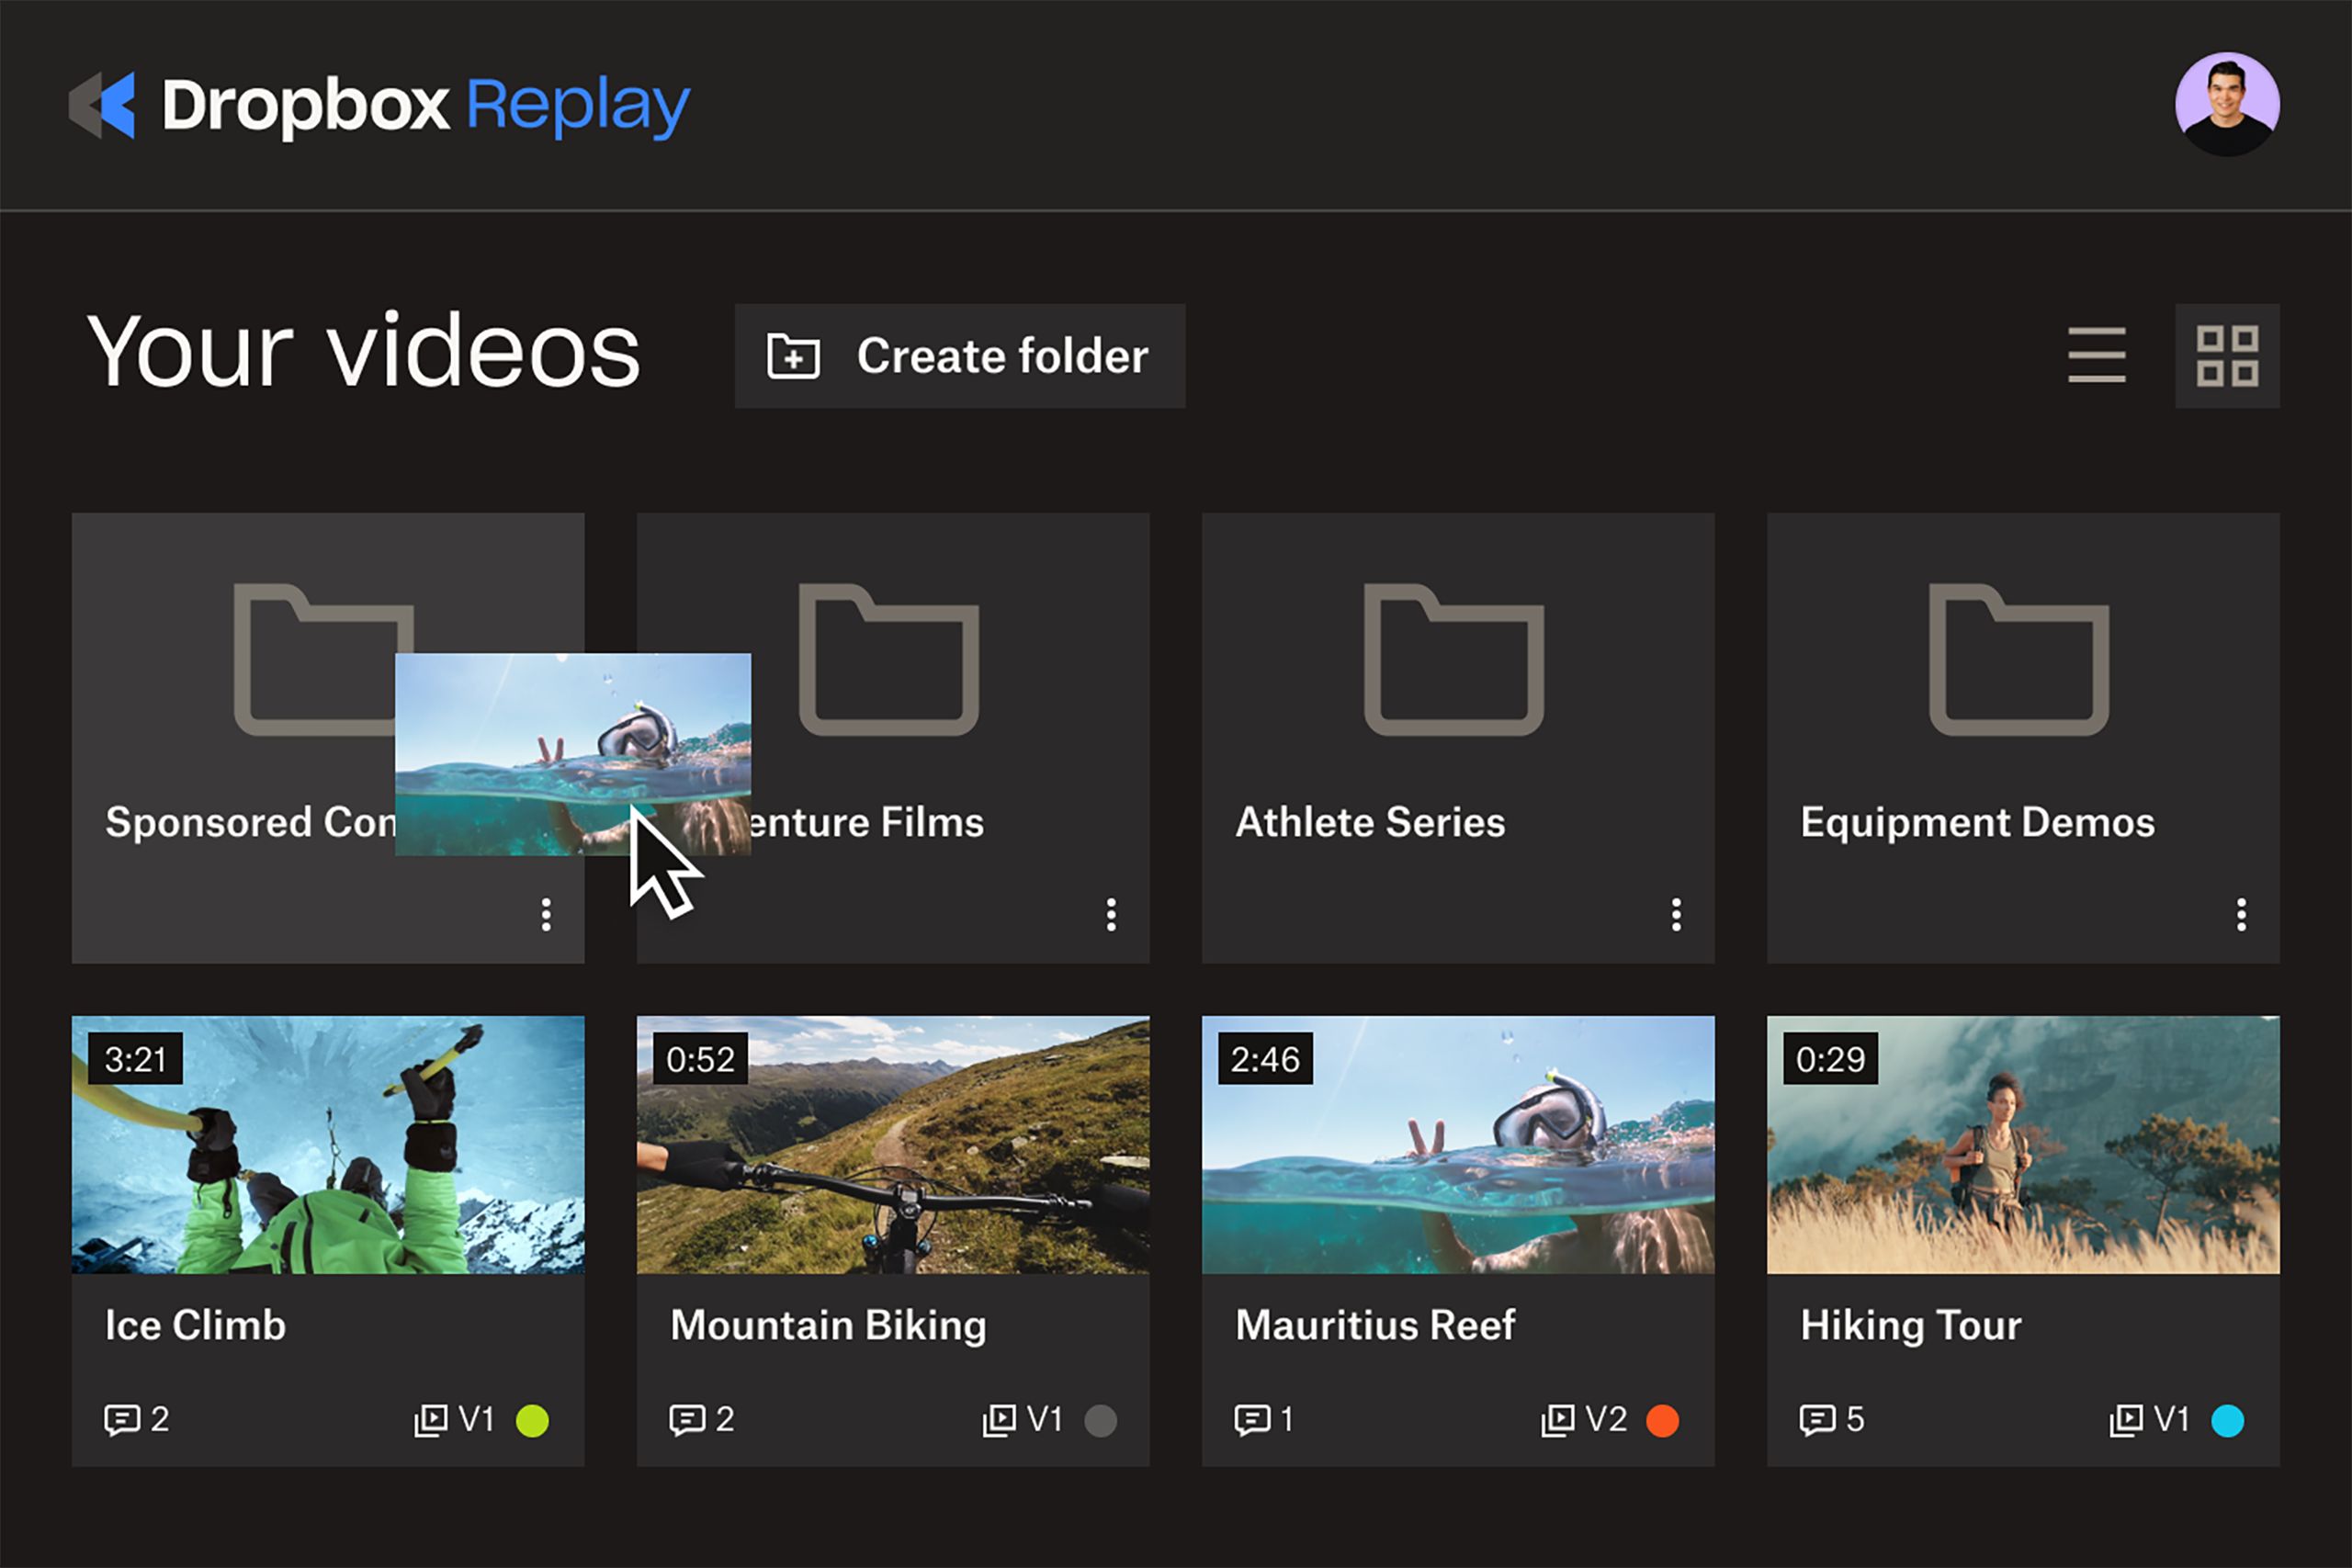 The Dropbox Replay interface in which a user moves a video into a folder